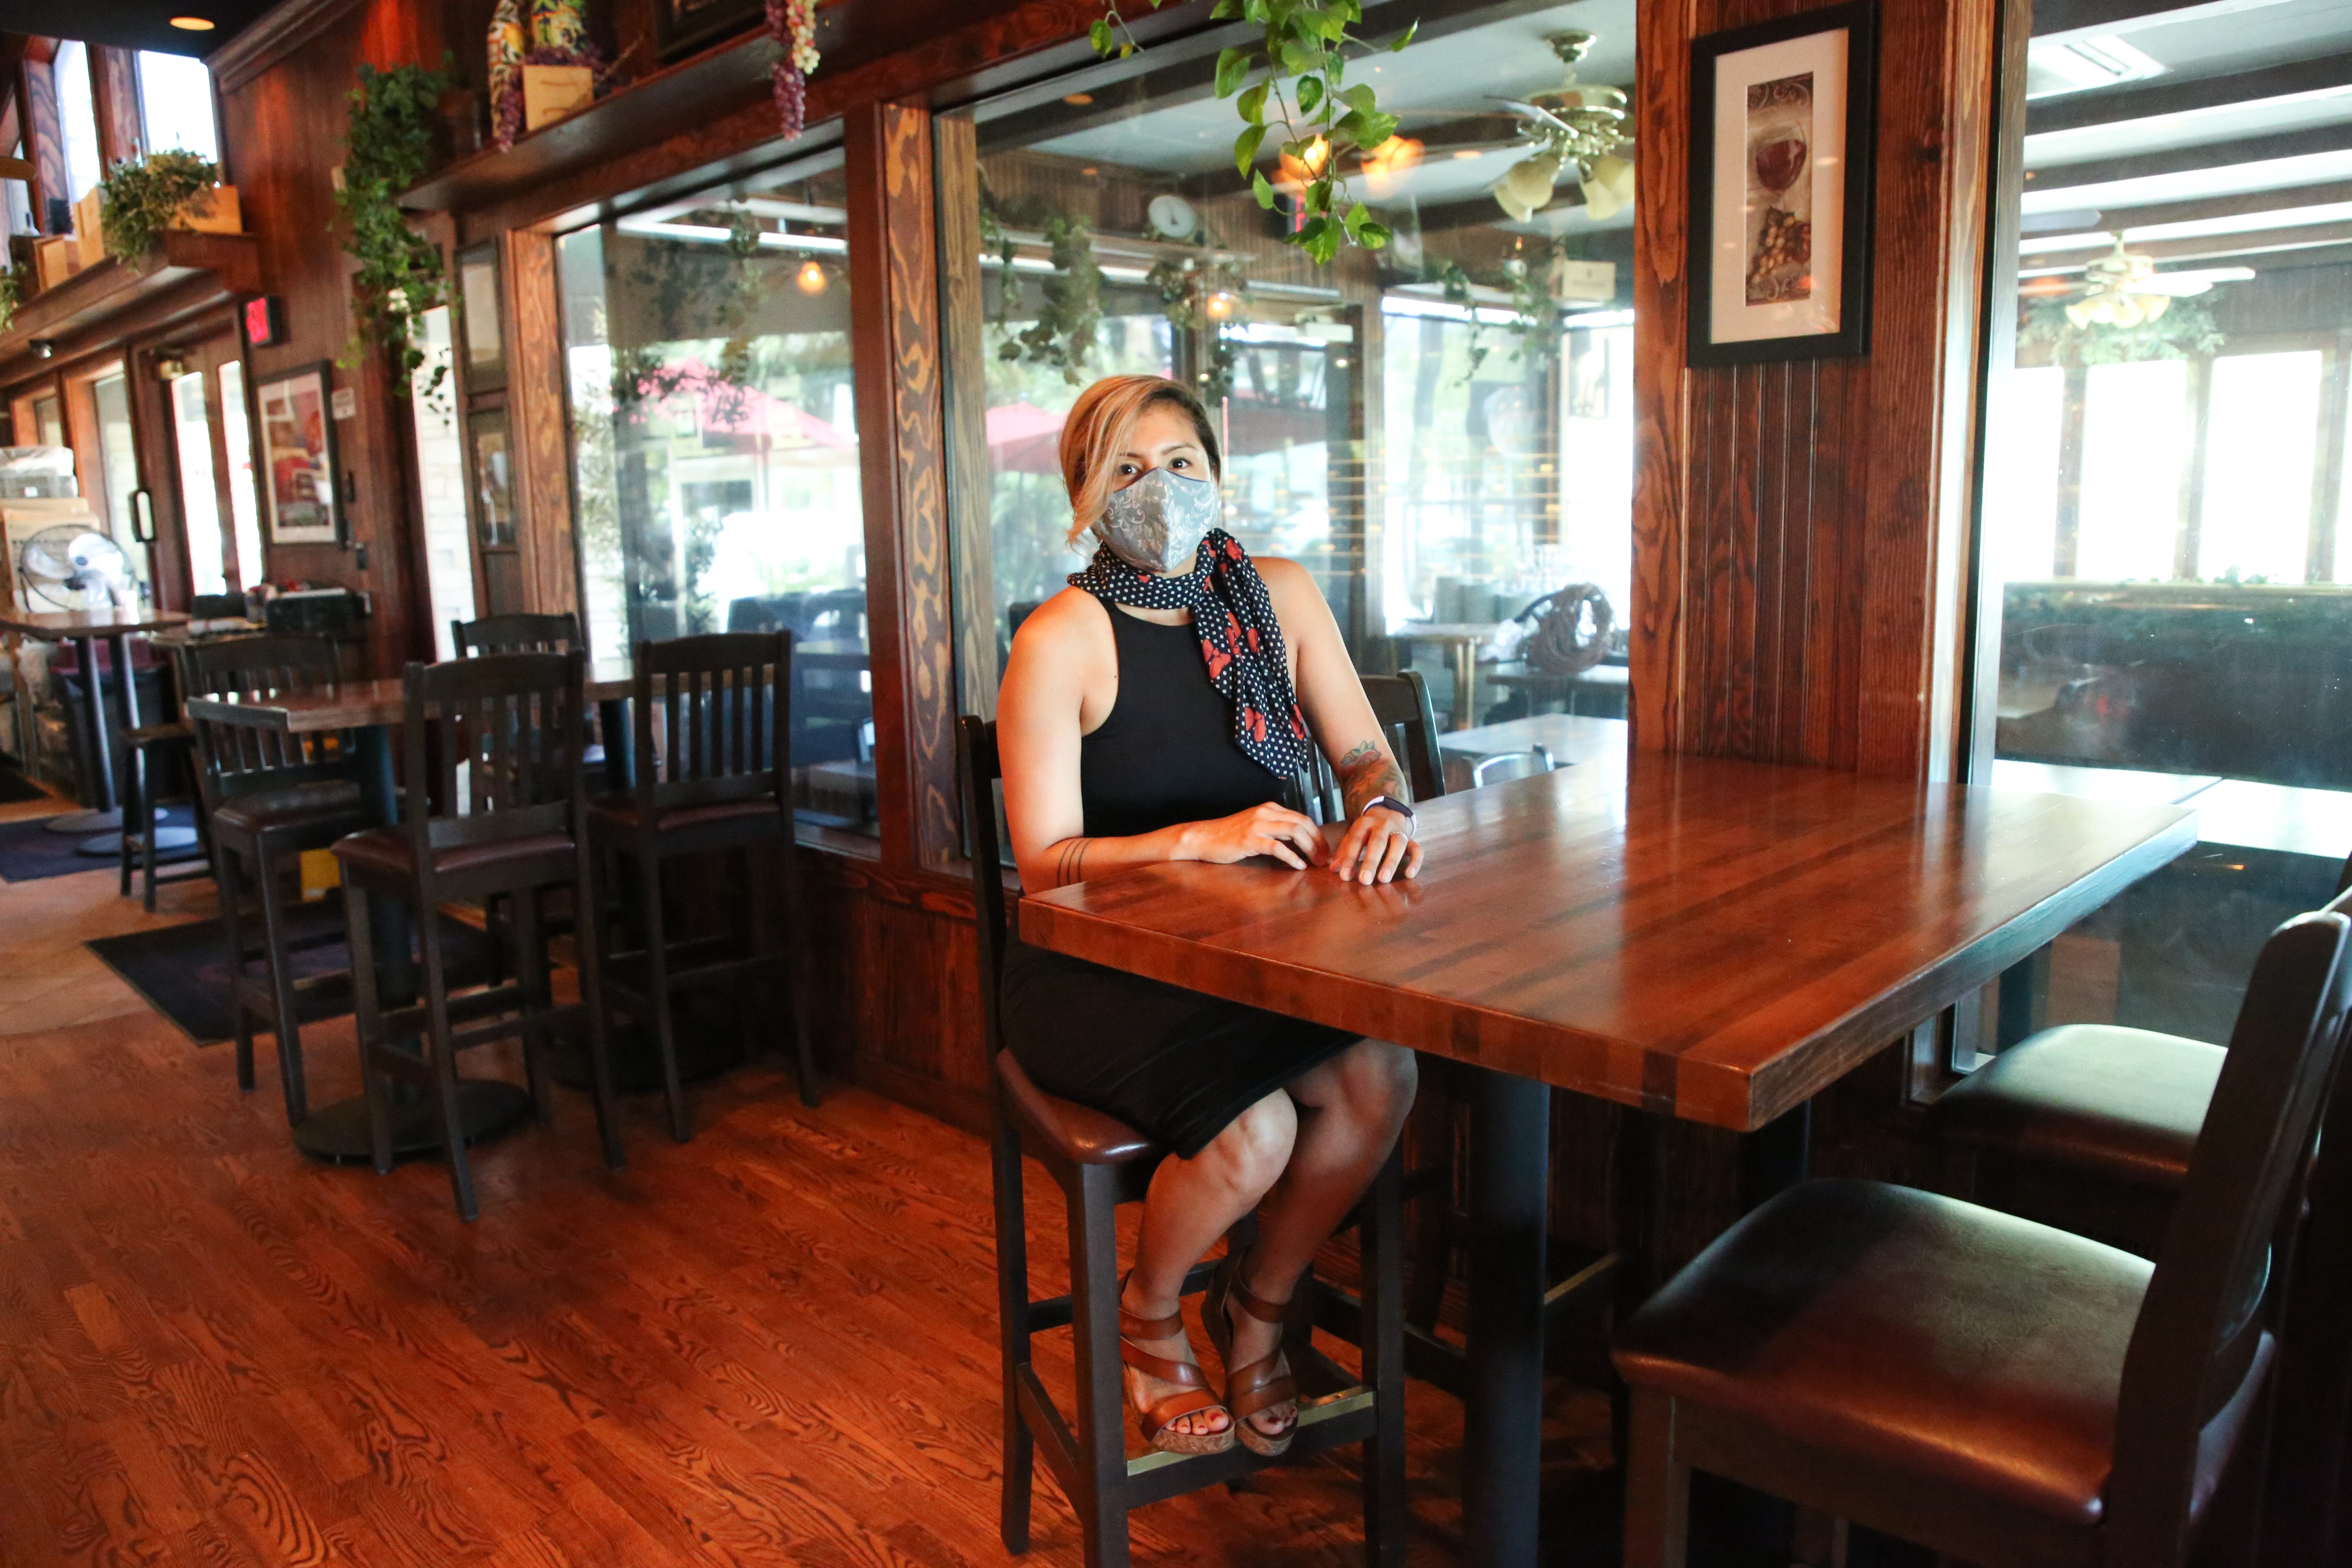 Antonia Harrington, general manager of Enzo's Bistro and Bar in La Quinta, Calif, sits at the high-top bar area seating on Wednesday, May 20, 2020. Tables are positioned at a distance in anticipation of dining in being permitted once again during the coronavirus pandemic.